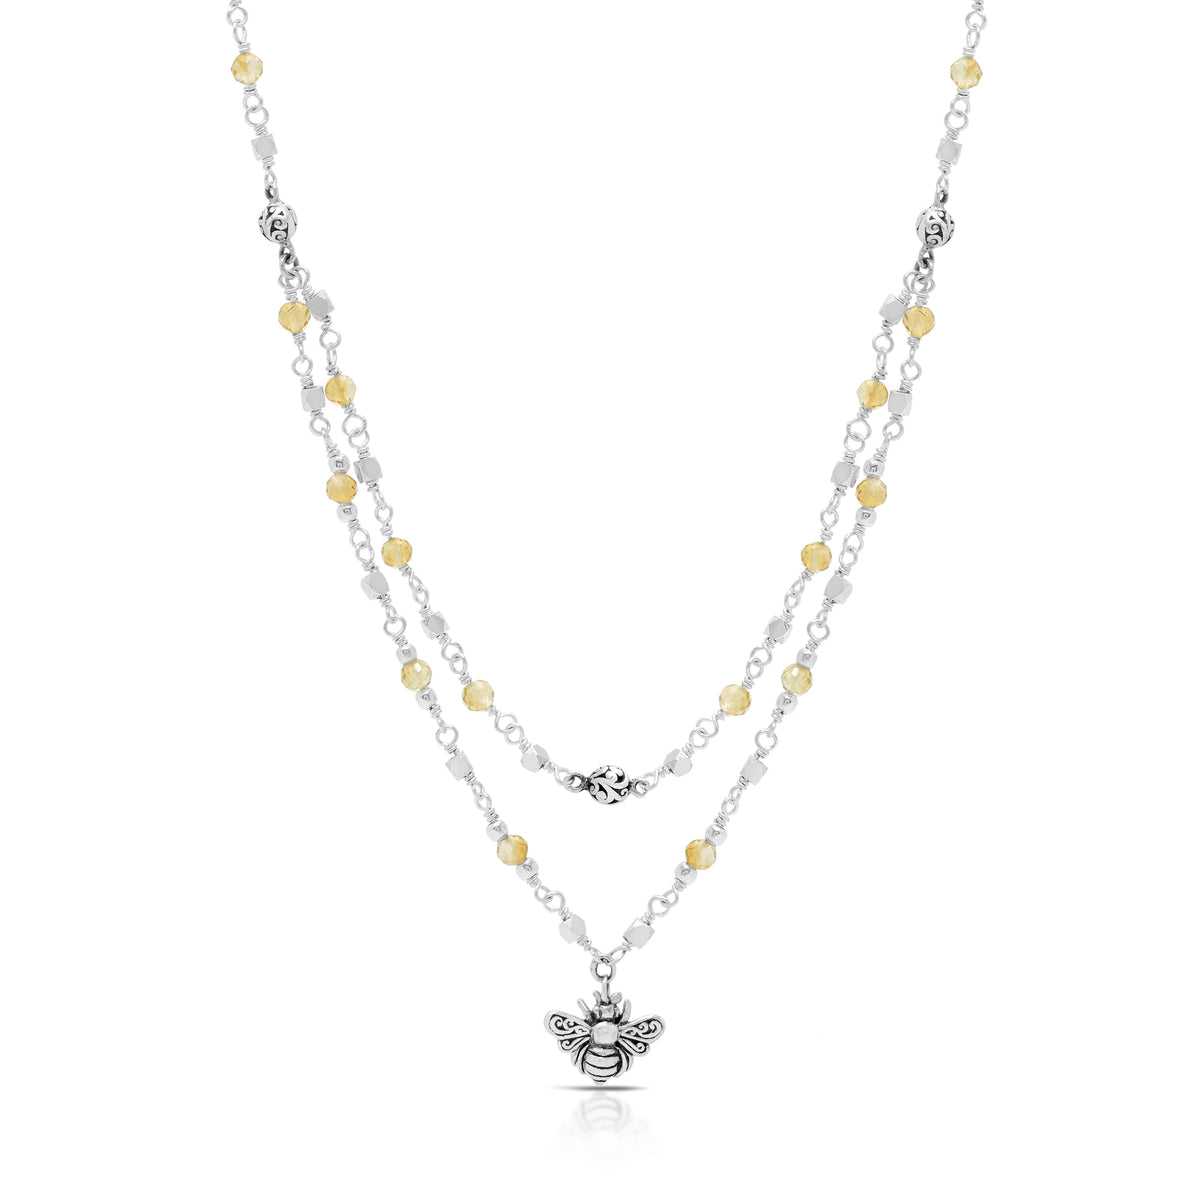 Faceted Citrine Beads and LH Scroll Beads on Two-Strand Wire-Wrapped Necklace with Small Bee Pendant (17"-20")